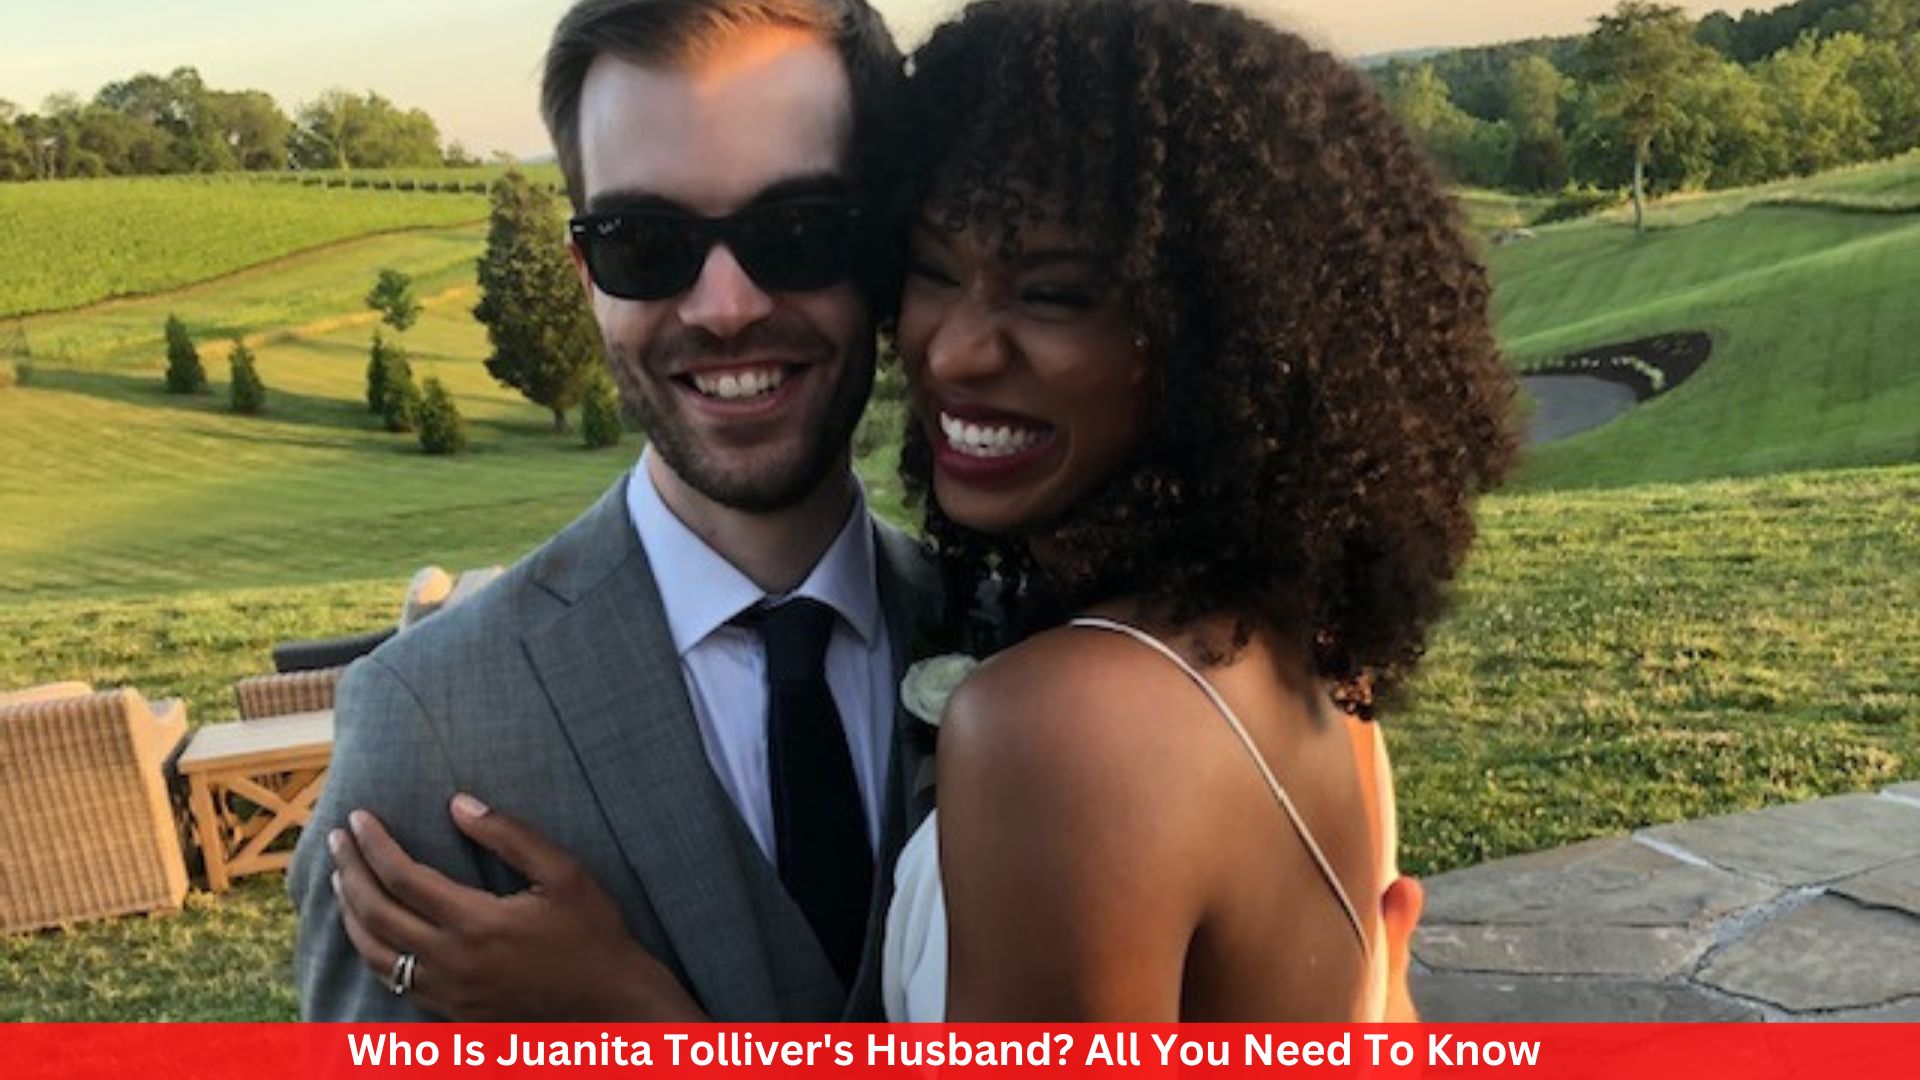 Who Is Juanita Tolliver's Husband? All You Need To Know